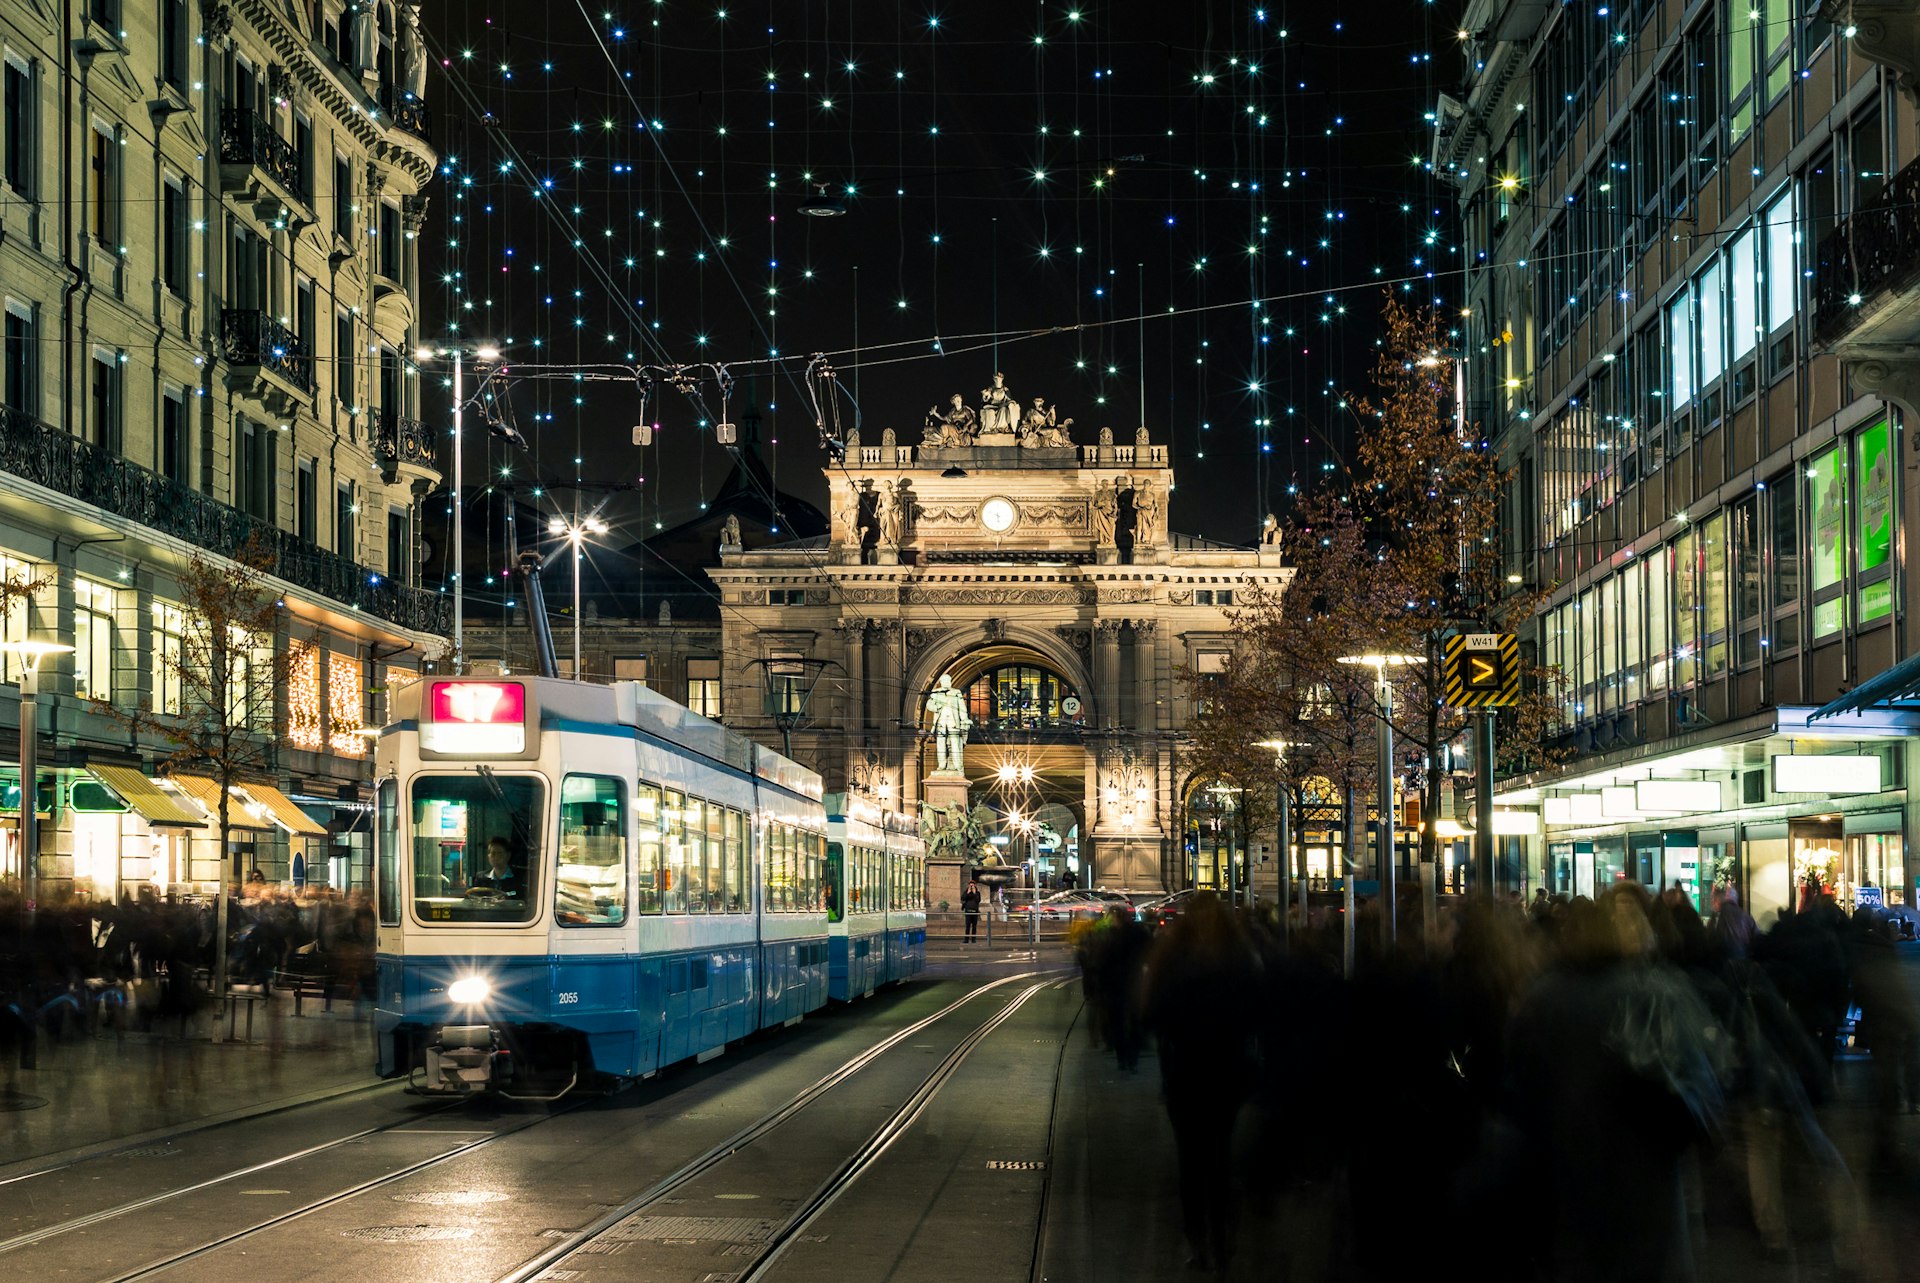 Christmas shopping in the decorated Zurich Bahnhofstrasse with a tram in the foreground